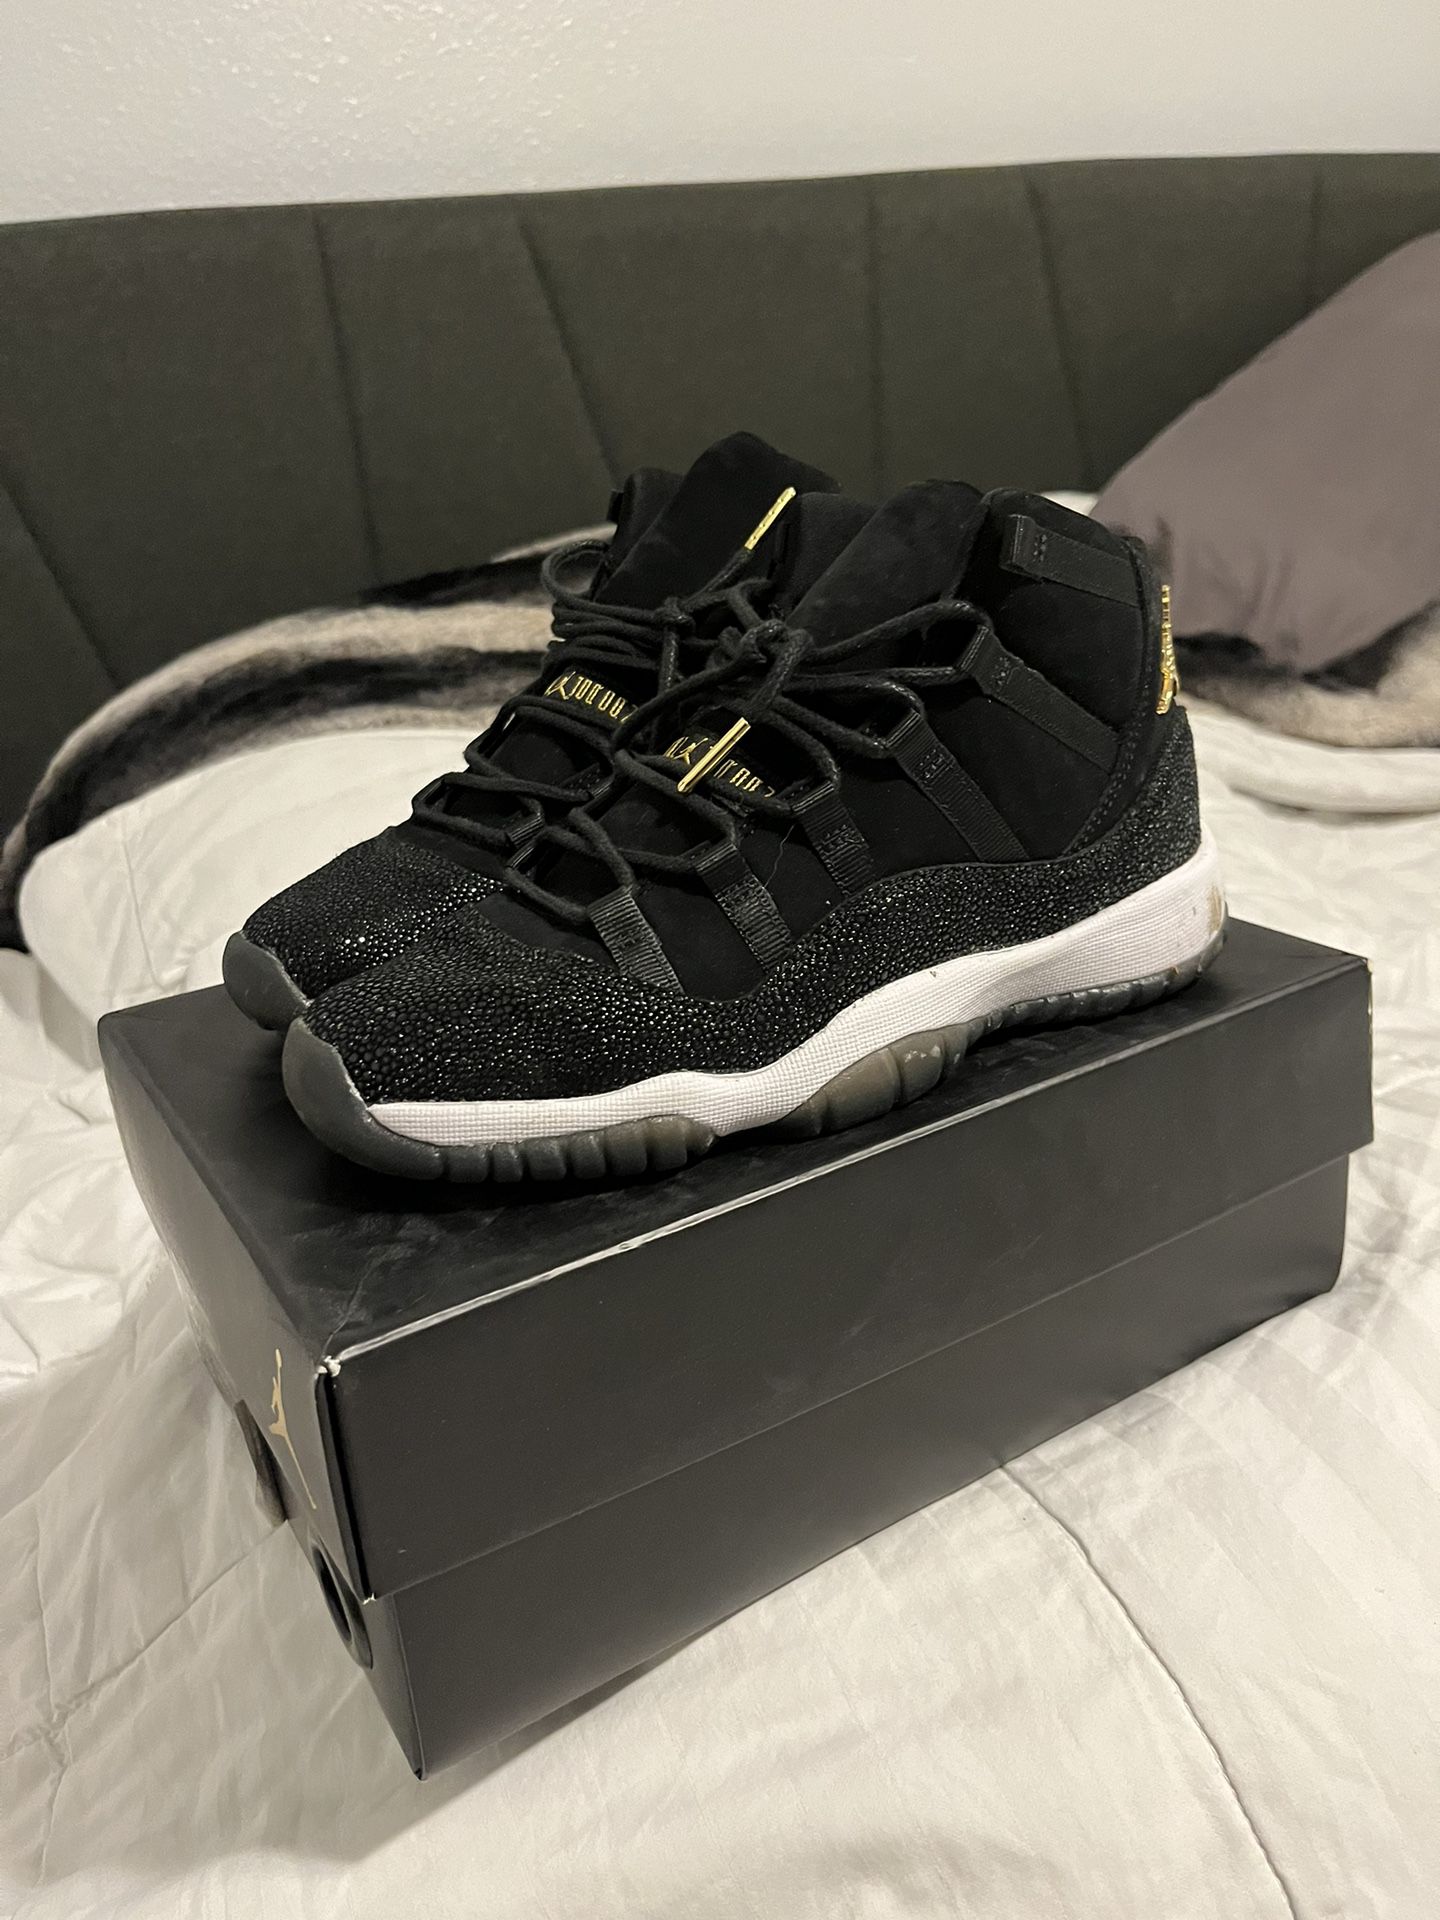 AIR JORDAN 11 HEIRESS BLACK AND GOLD (SIZE 6.5 WOMANS)